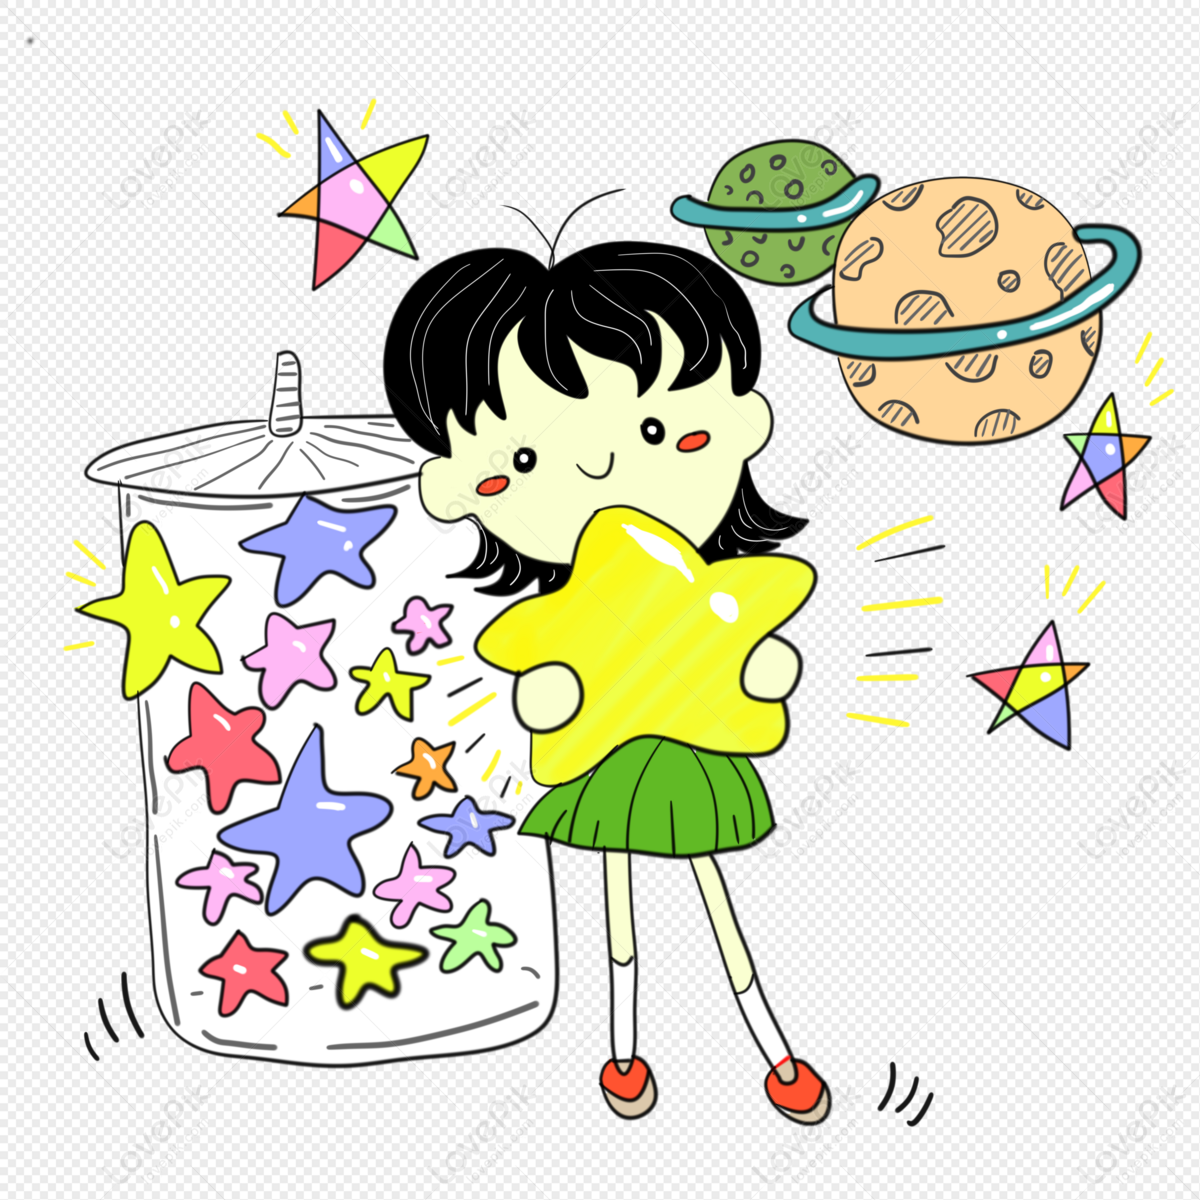 Childrens Day Cartoon Stars Kids Free PNG And Clipart Image For Free  Download - Lovepik | 401332049